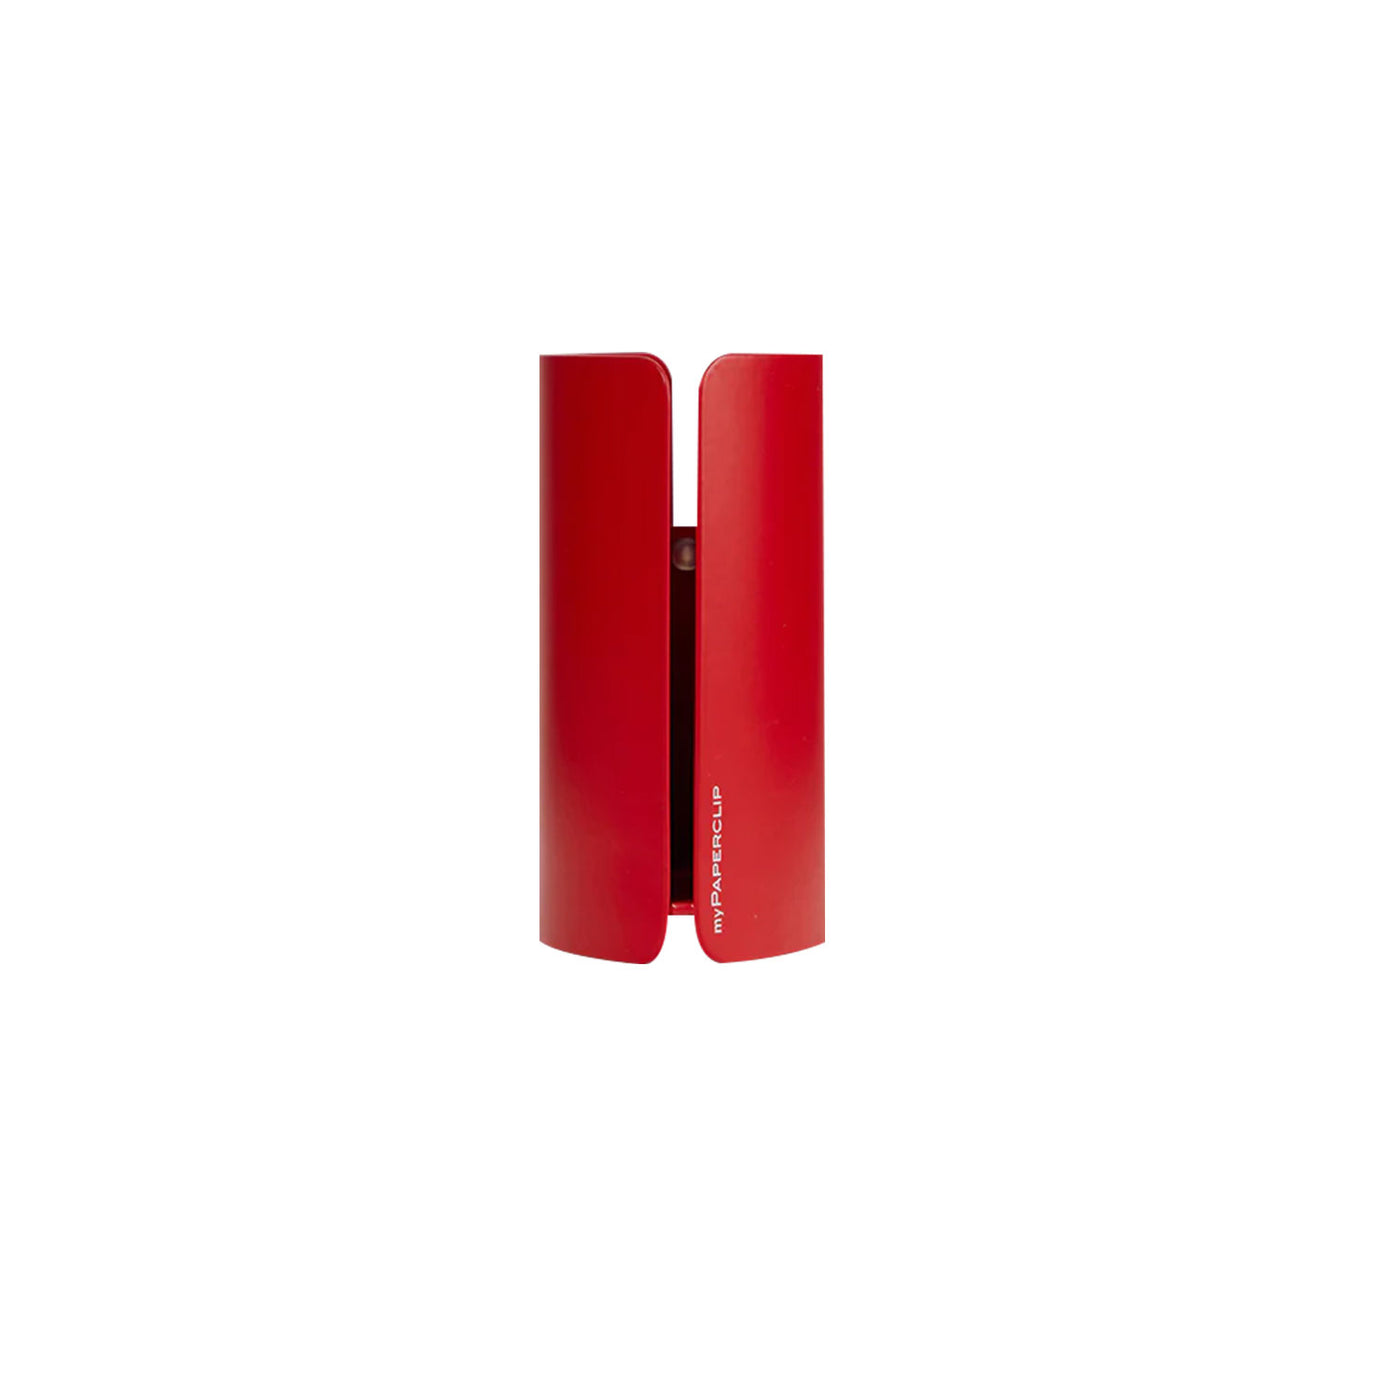 myPAPERCLIP Metal Pen Stand - Red 1